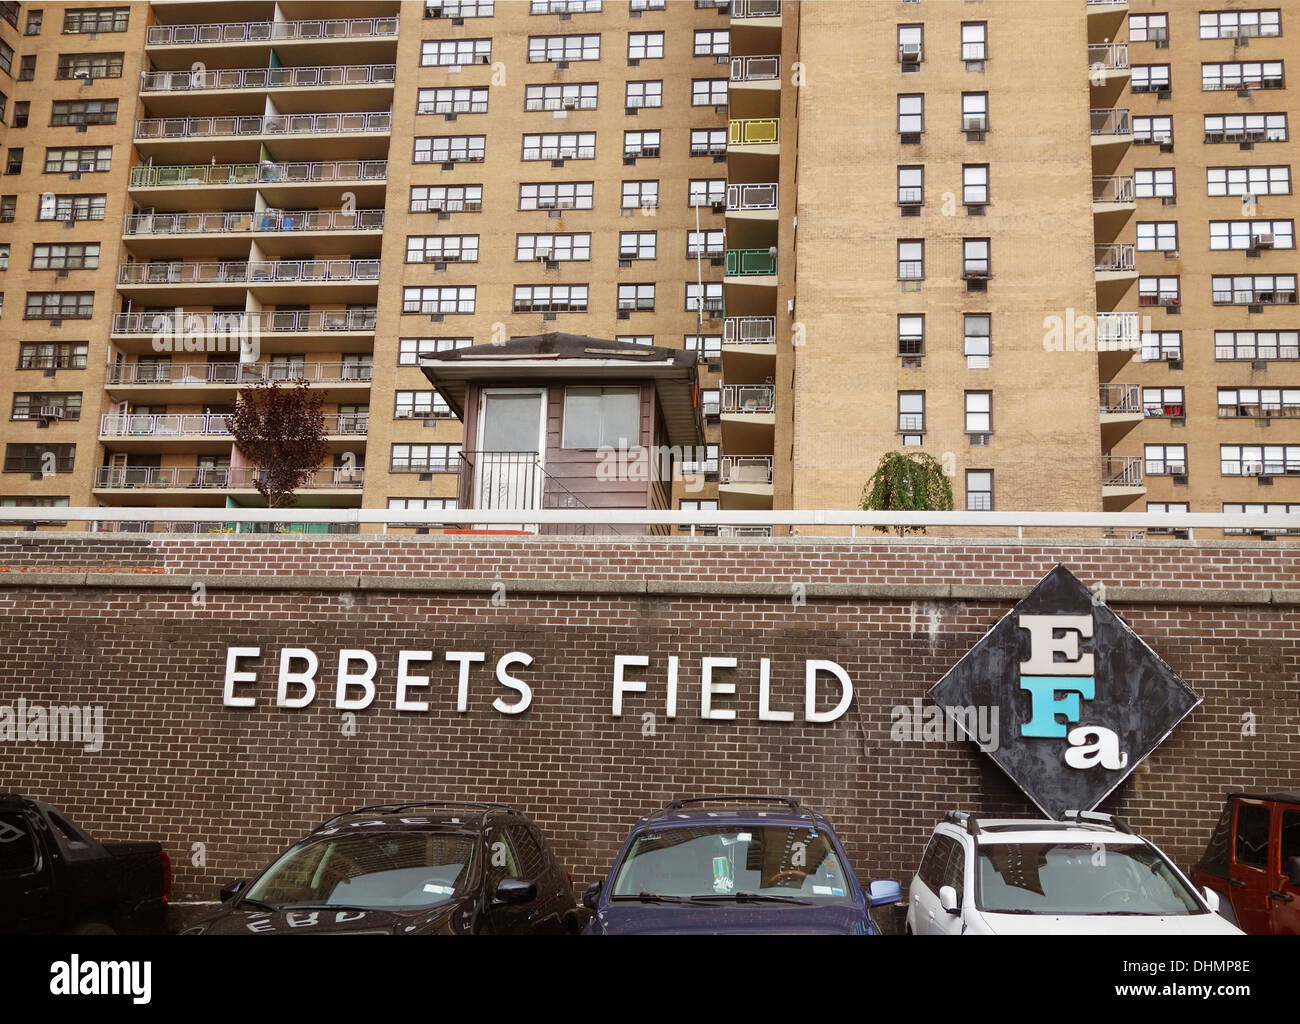 Ebbets Field apartment houses Stock Photo